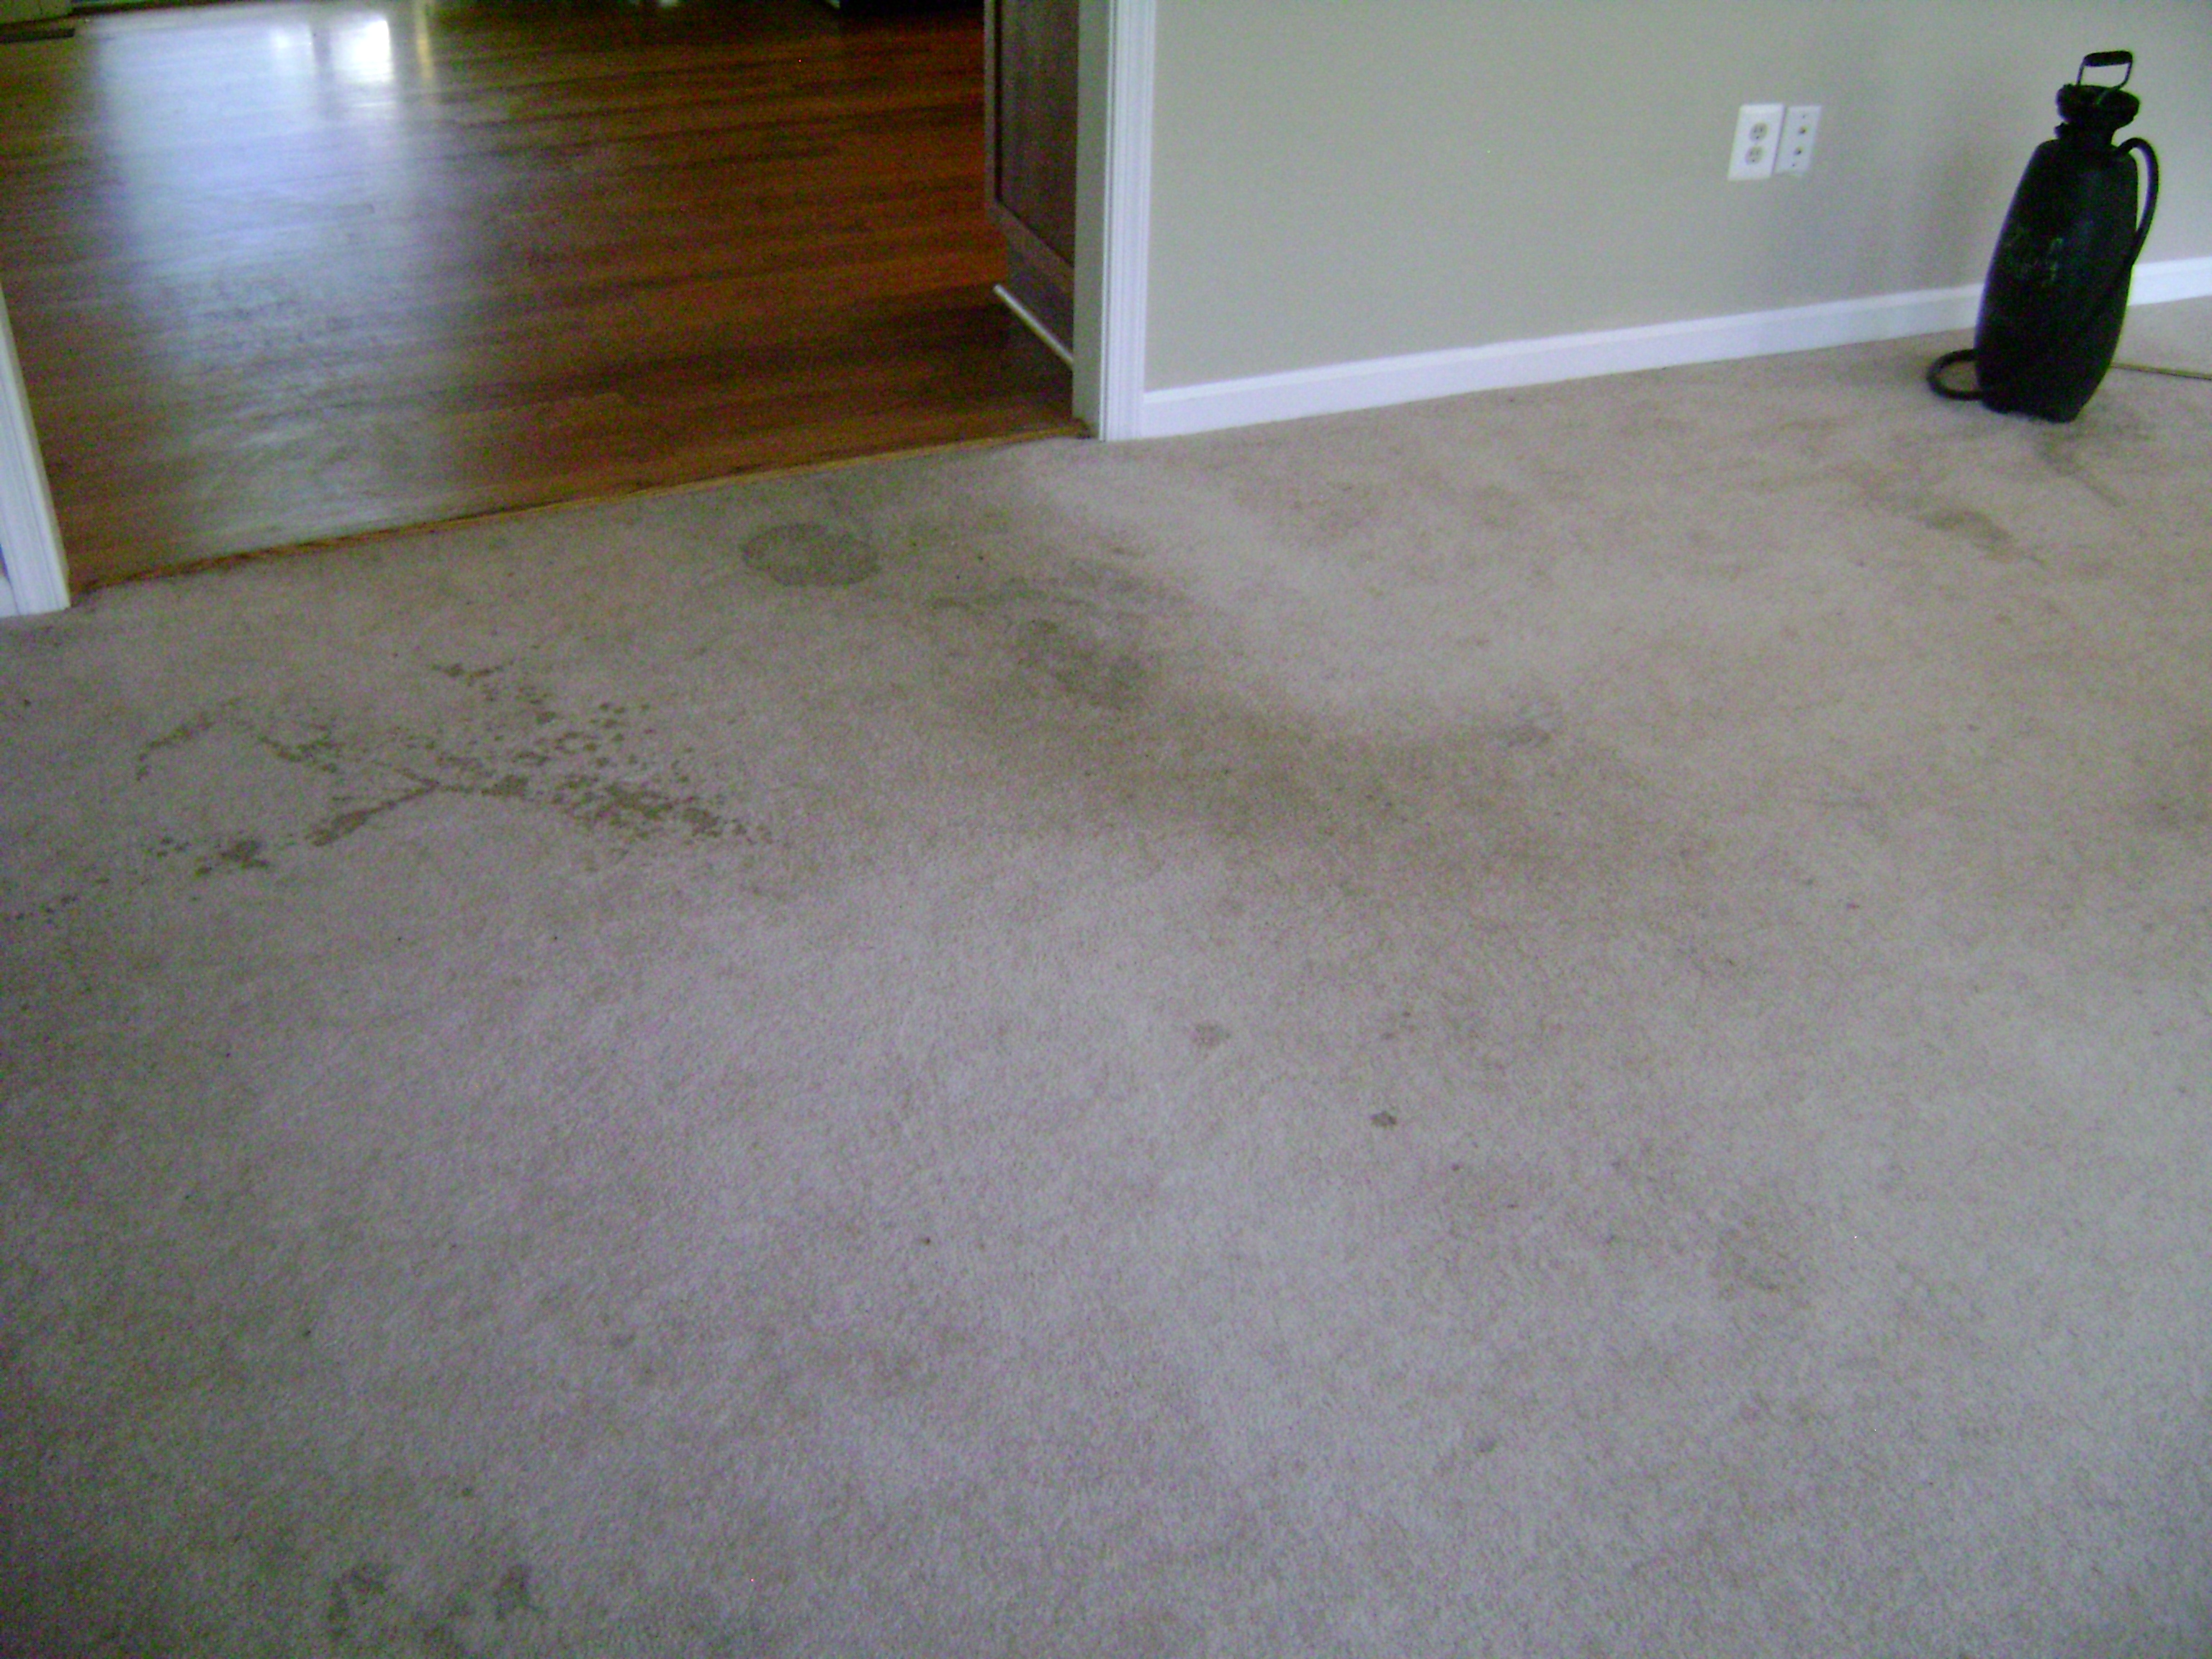 http://www.pacificcarpetcleaning.net/images/3%20Benefits%20Of%20Commercial%20Carpet%20Cleaning%20Newport%20Beach%20CA.jpg